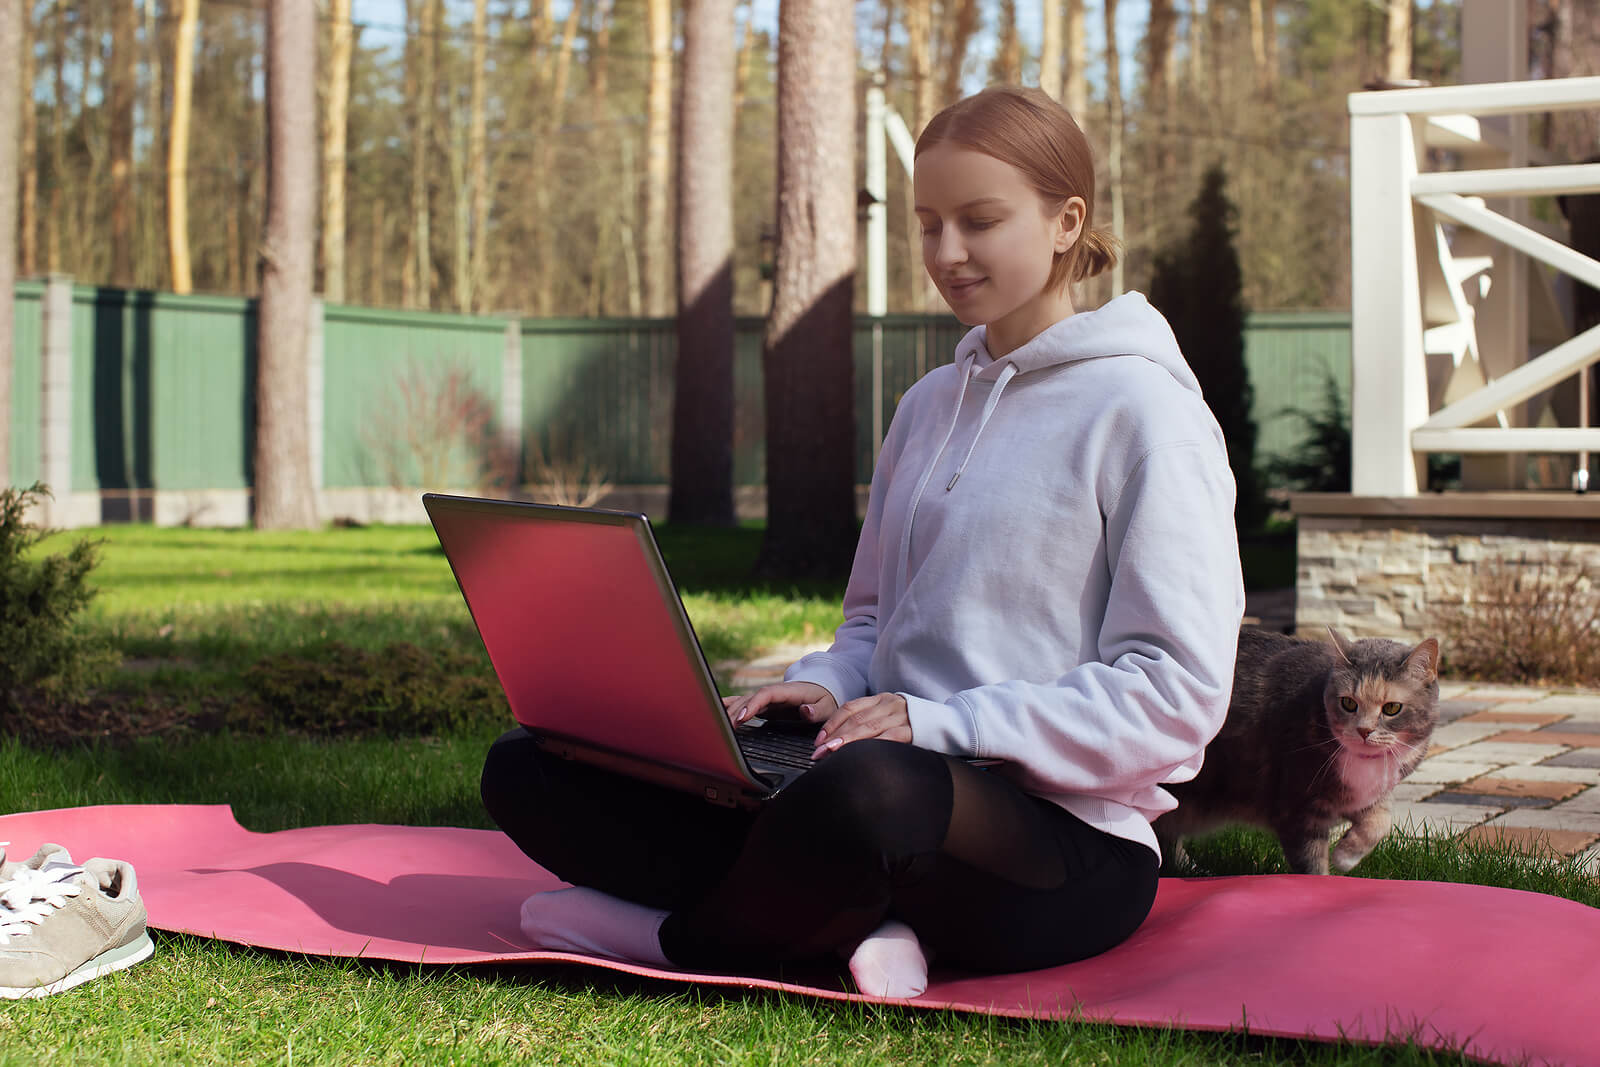 A woman working on her laptop while outside in the grass. Want to be able to be in therapy whenever? Begin online therapy in Austin, Tx, and transform your idea of therapy. Speak with an online therapist today!